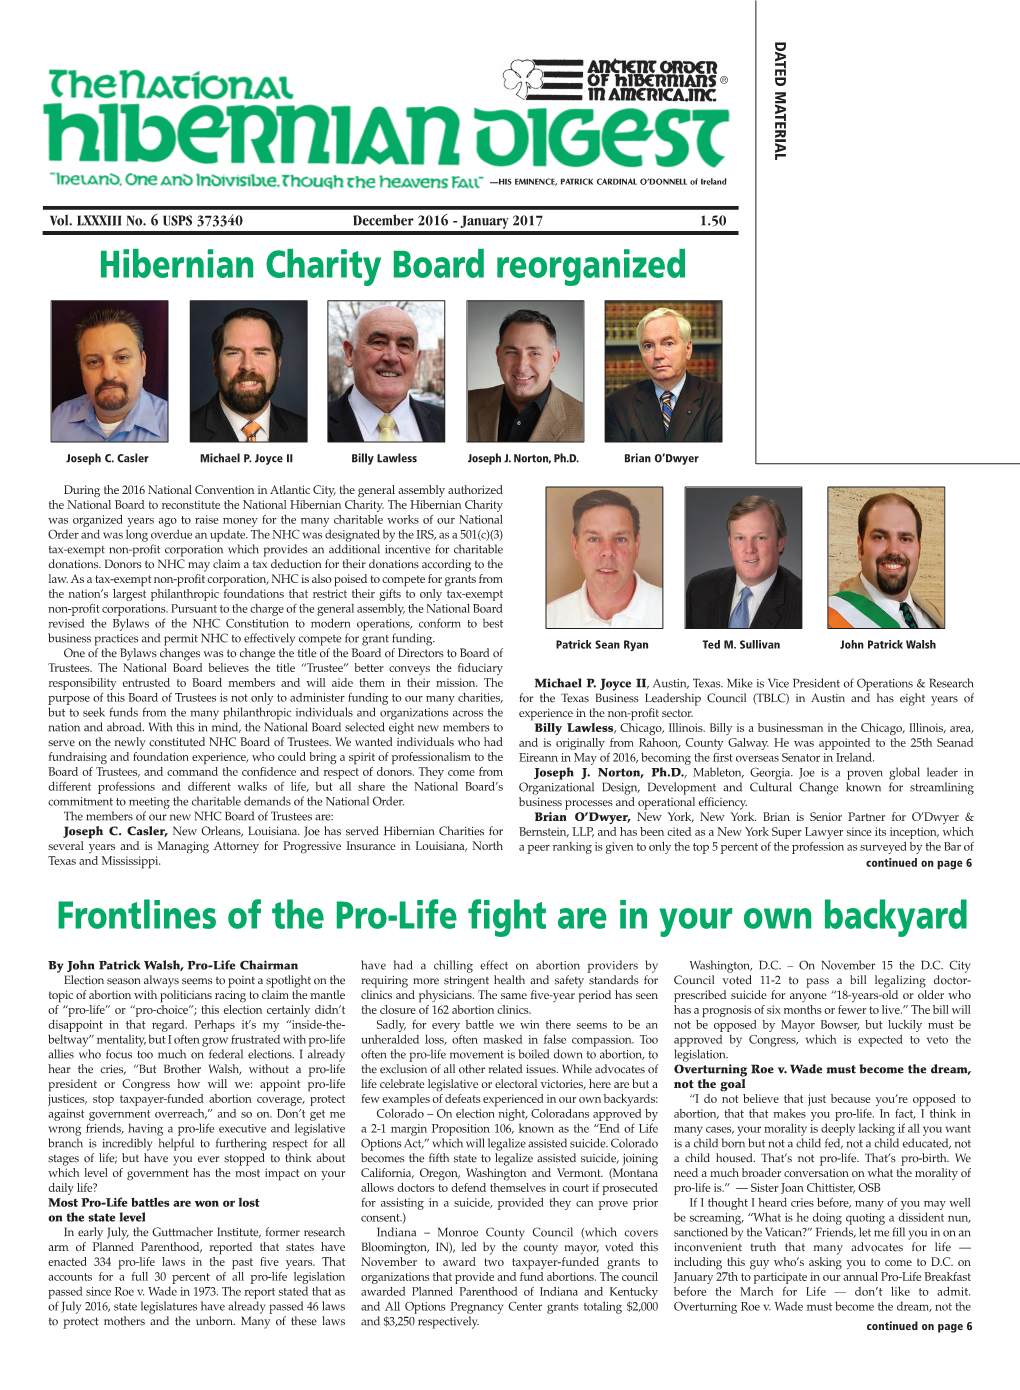 Hibernian Charity Board Reorganized Frontlines of the Pro-Life Fight Are In